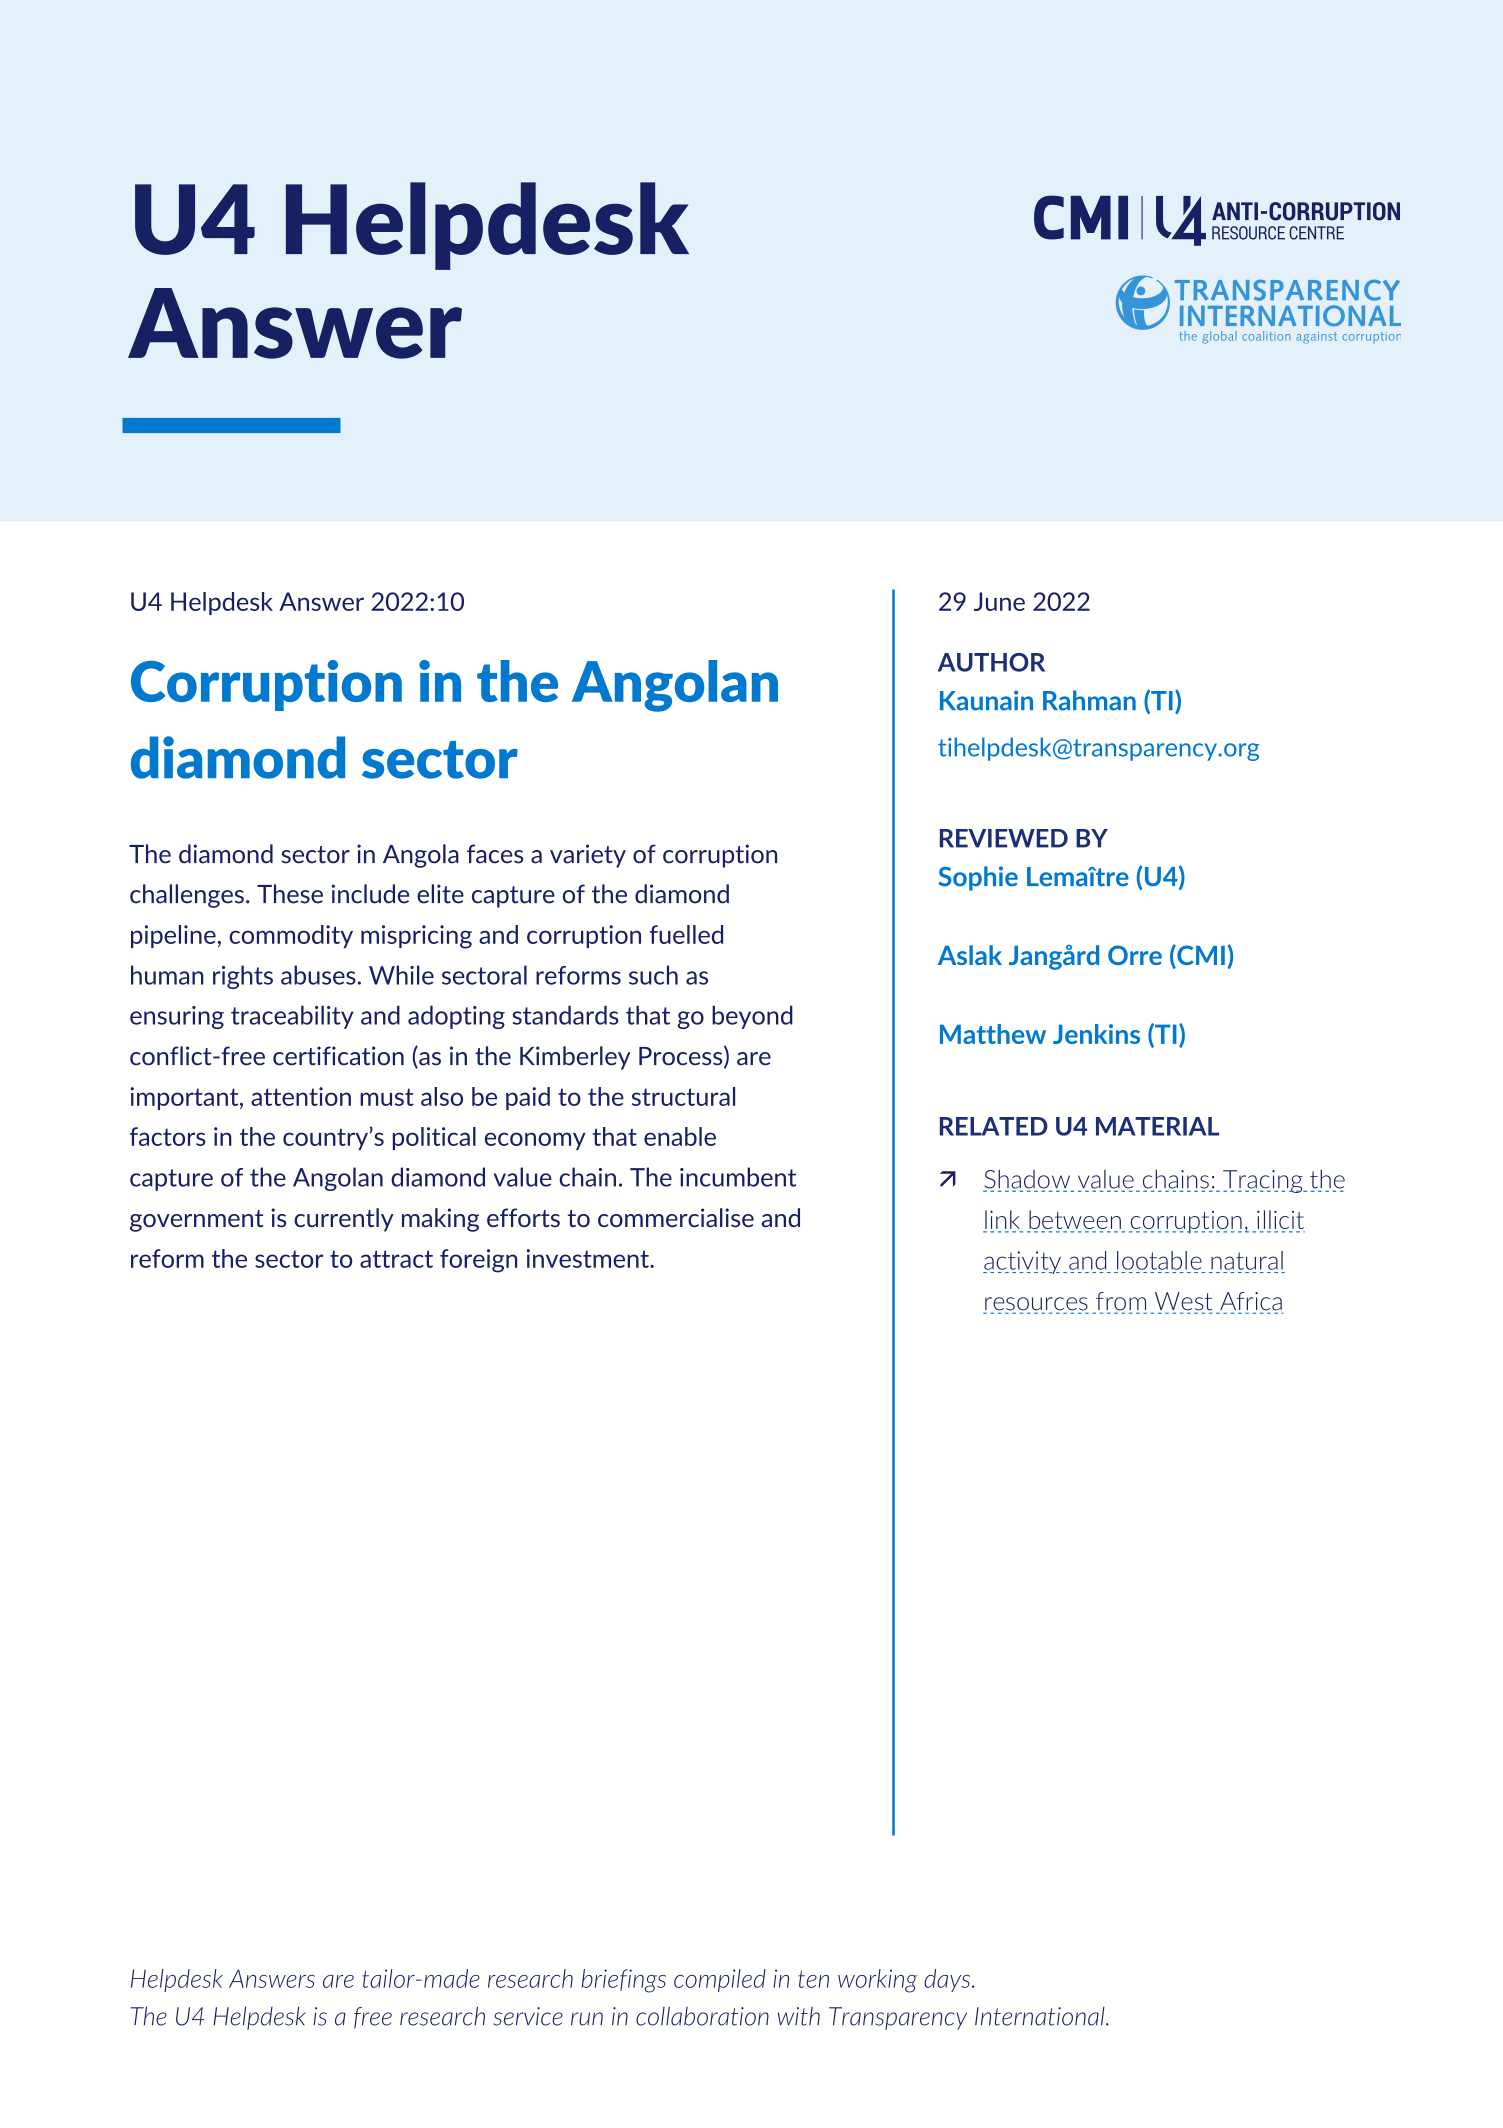 Corruption in the Angolan diamond sector